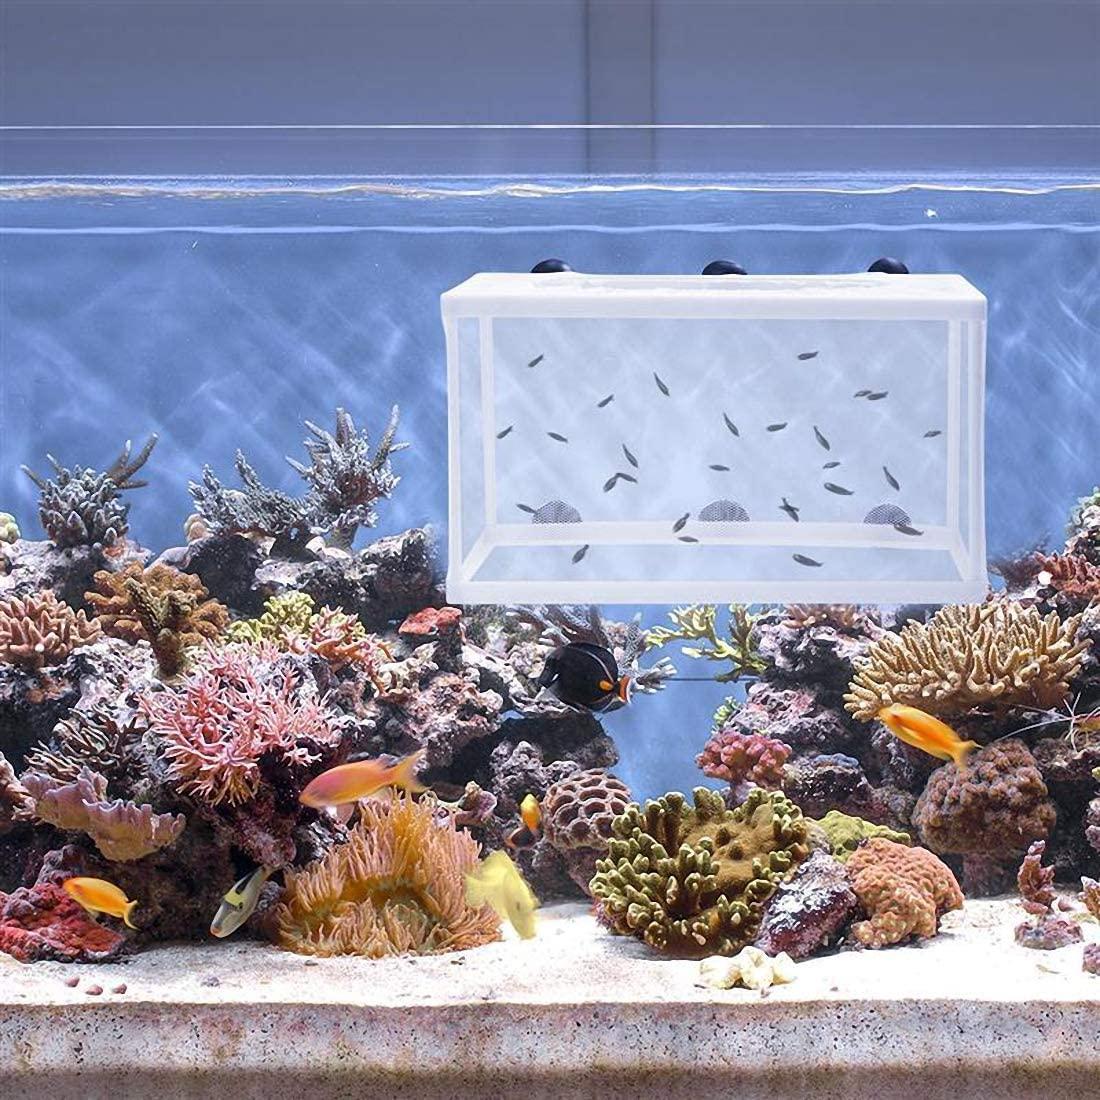 Net cover recommendations for 10-gallon tank